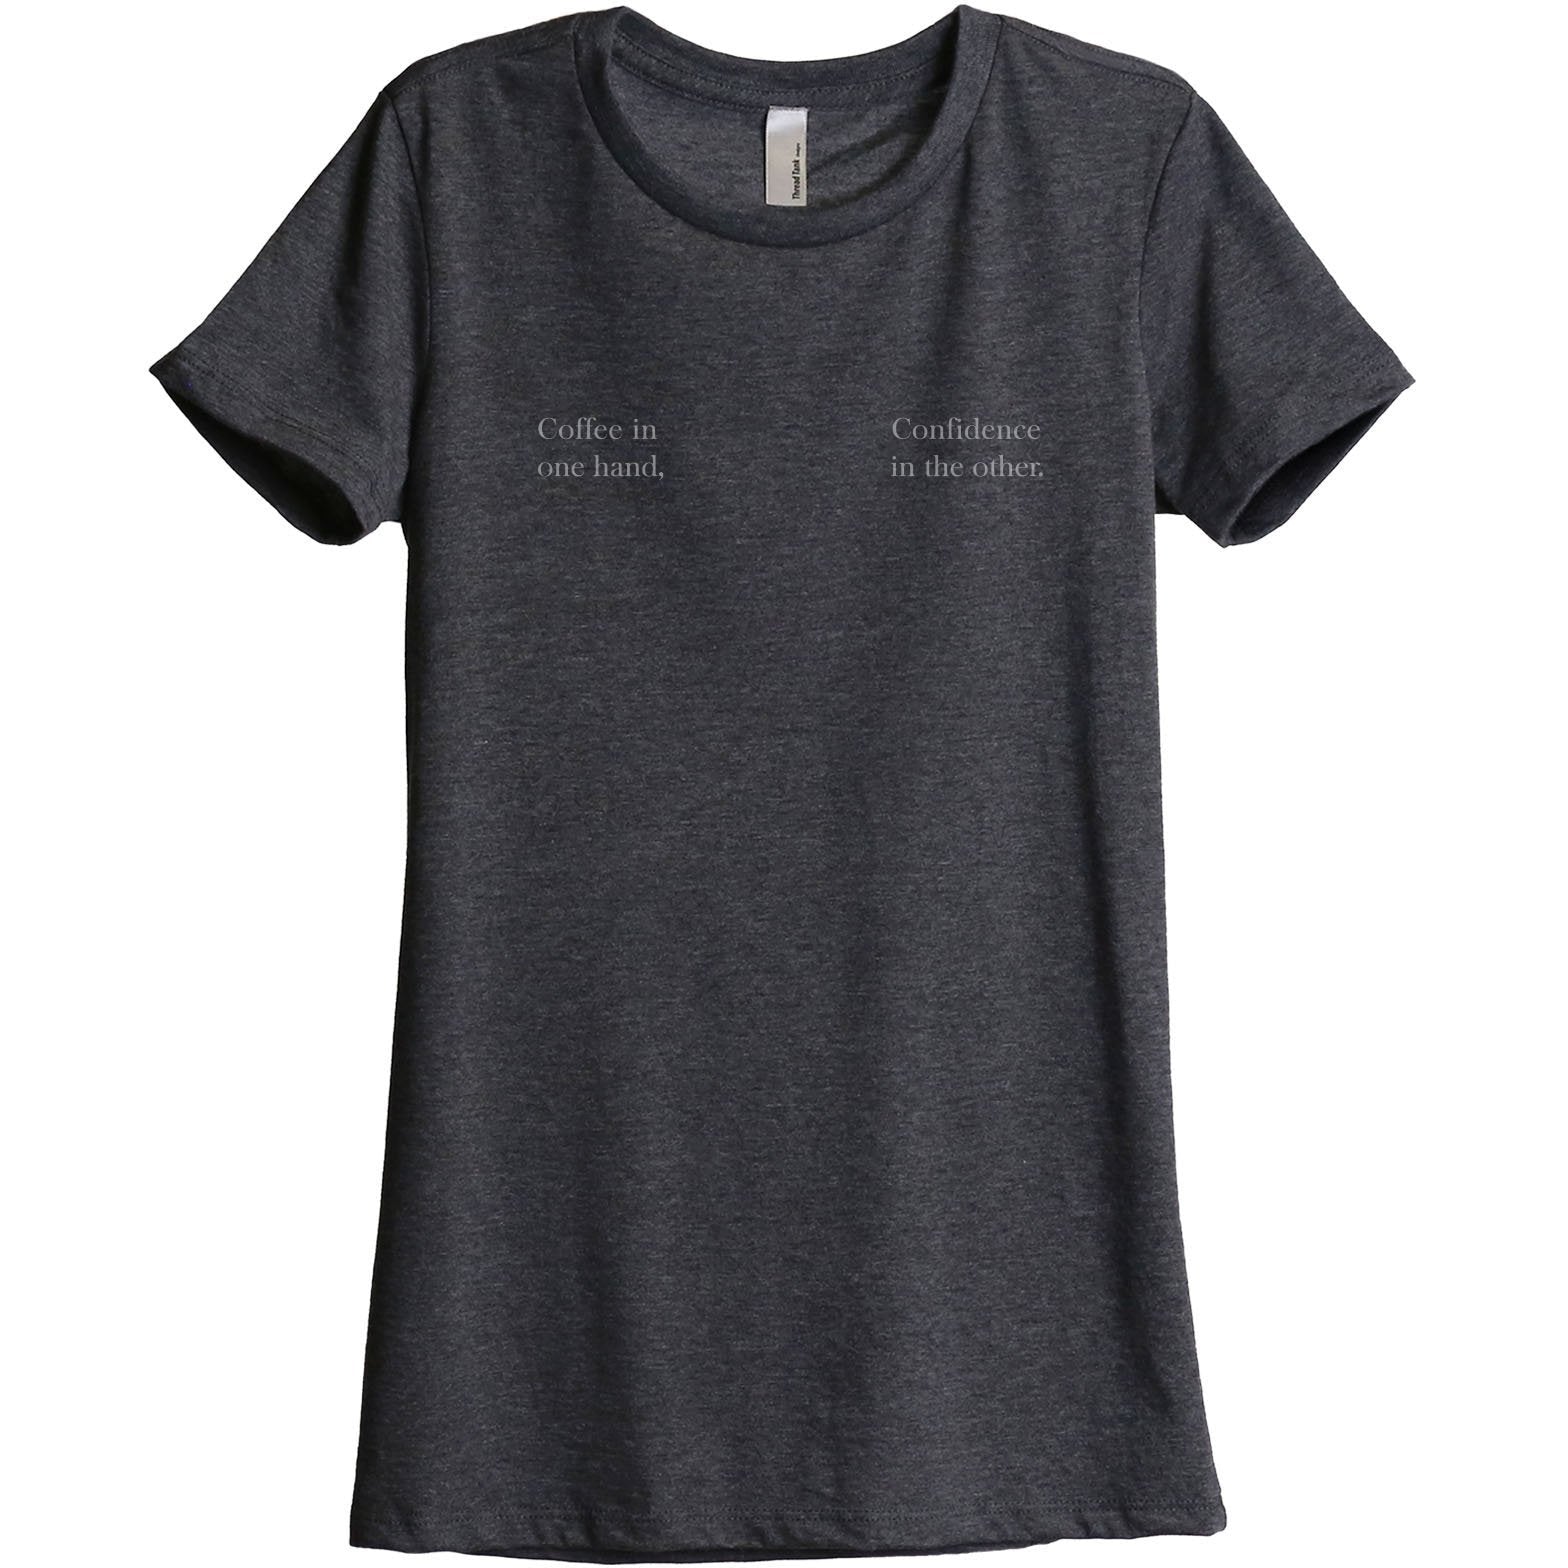 Coffee In One Hand Confidence Other Women's Relaxed Crewneck T-Shirt Top Tee Charcoal Grey
